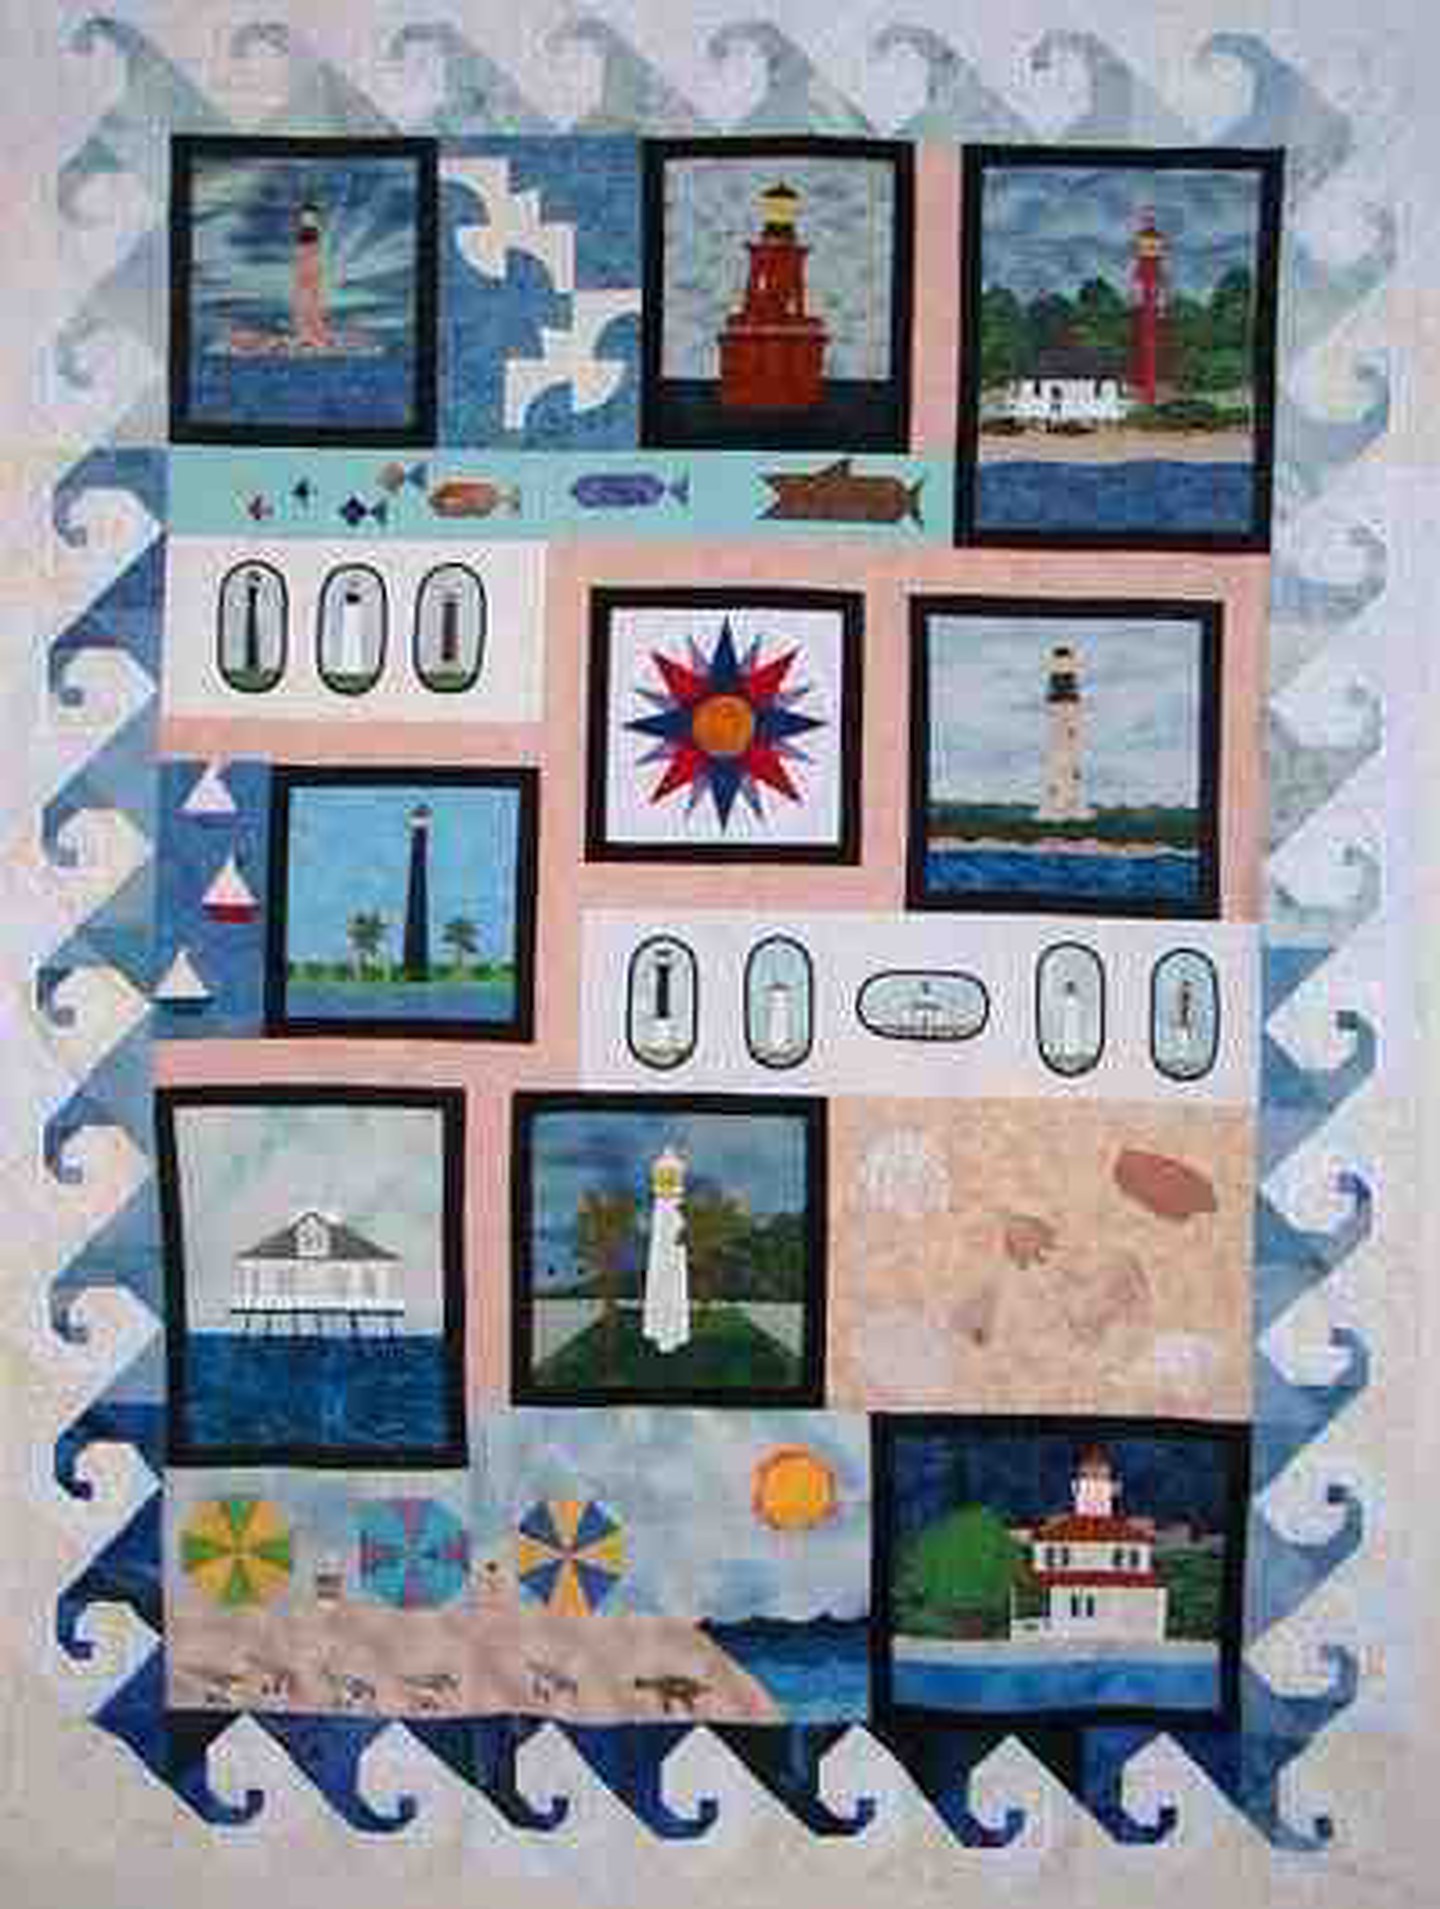 Stephanie Bryant's version of this quilt